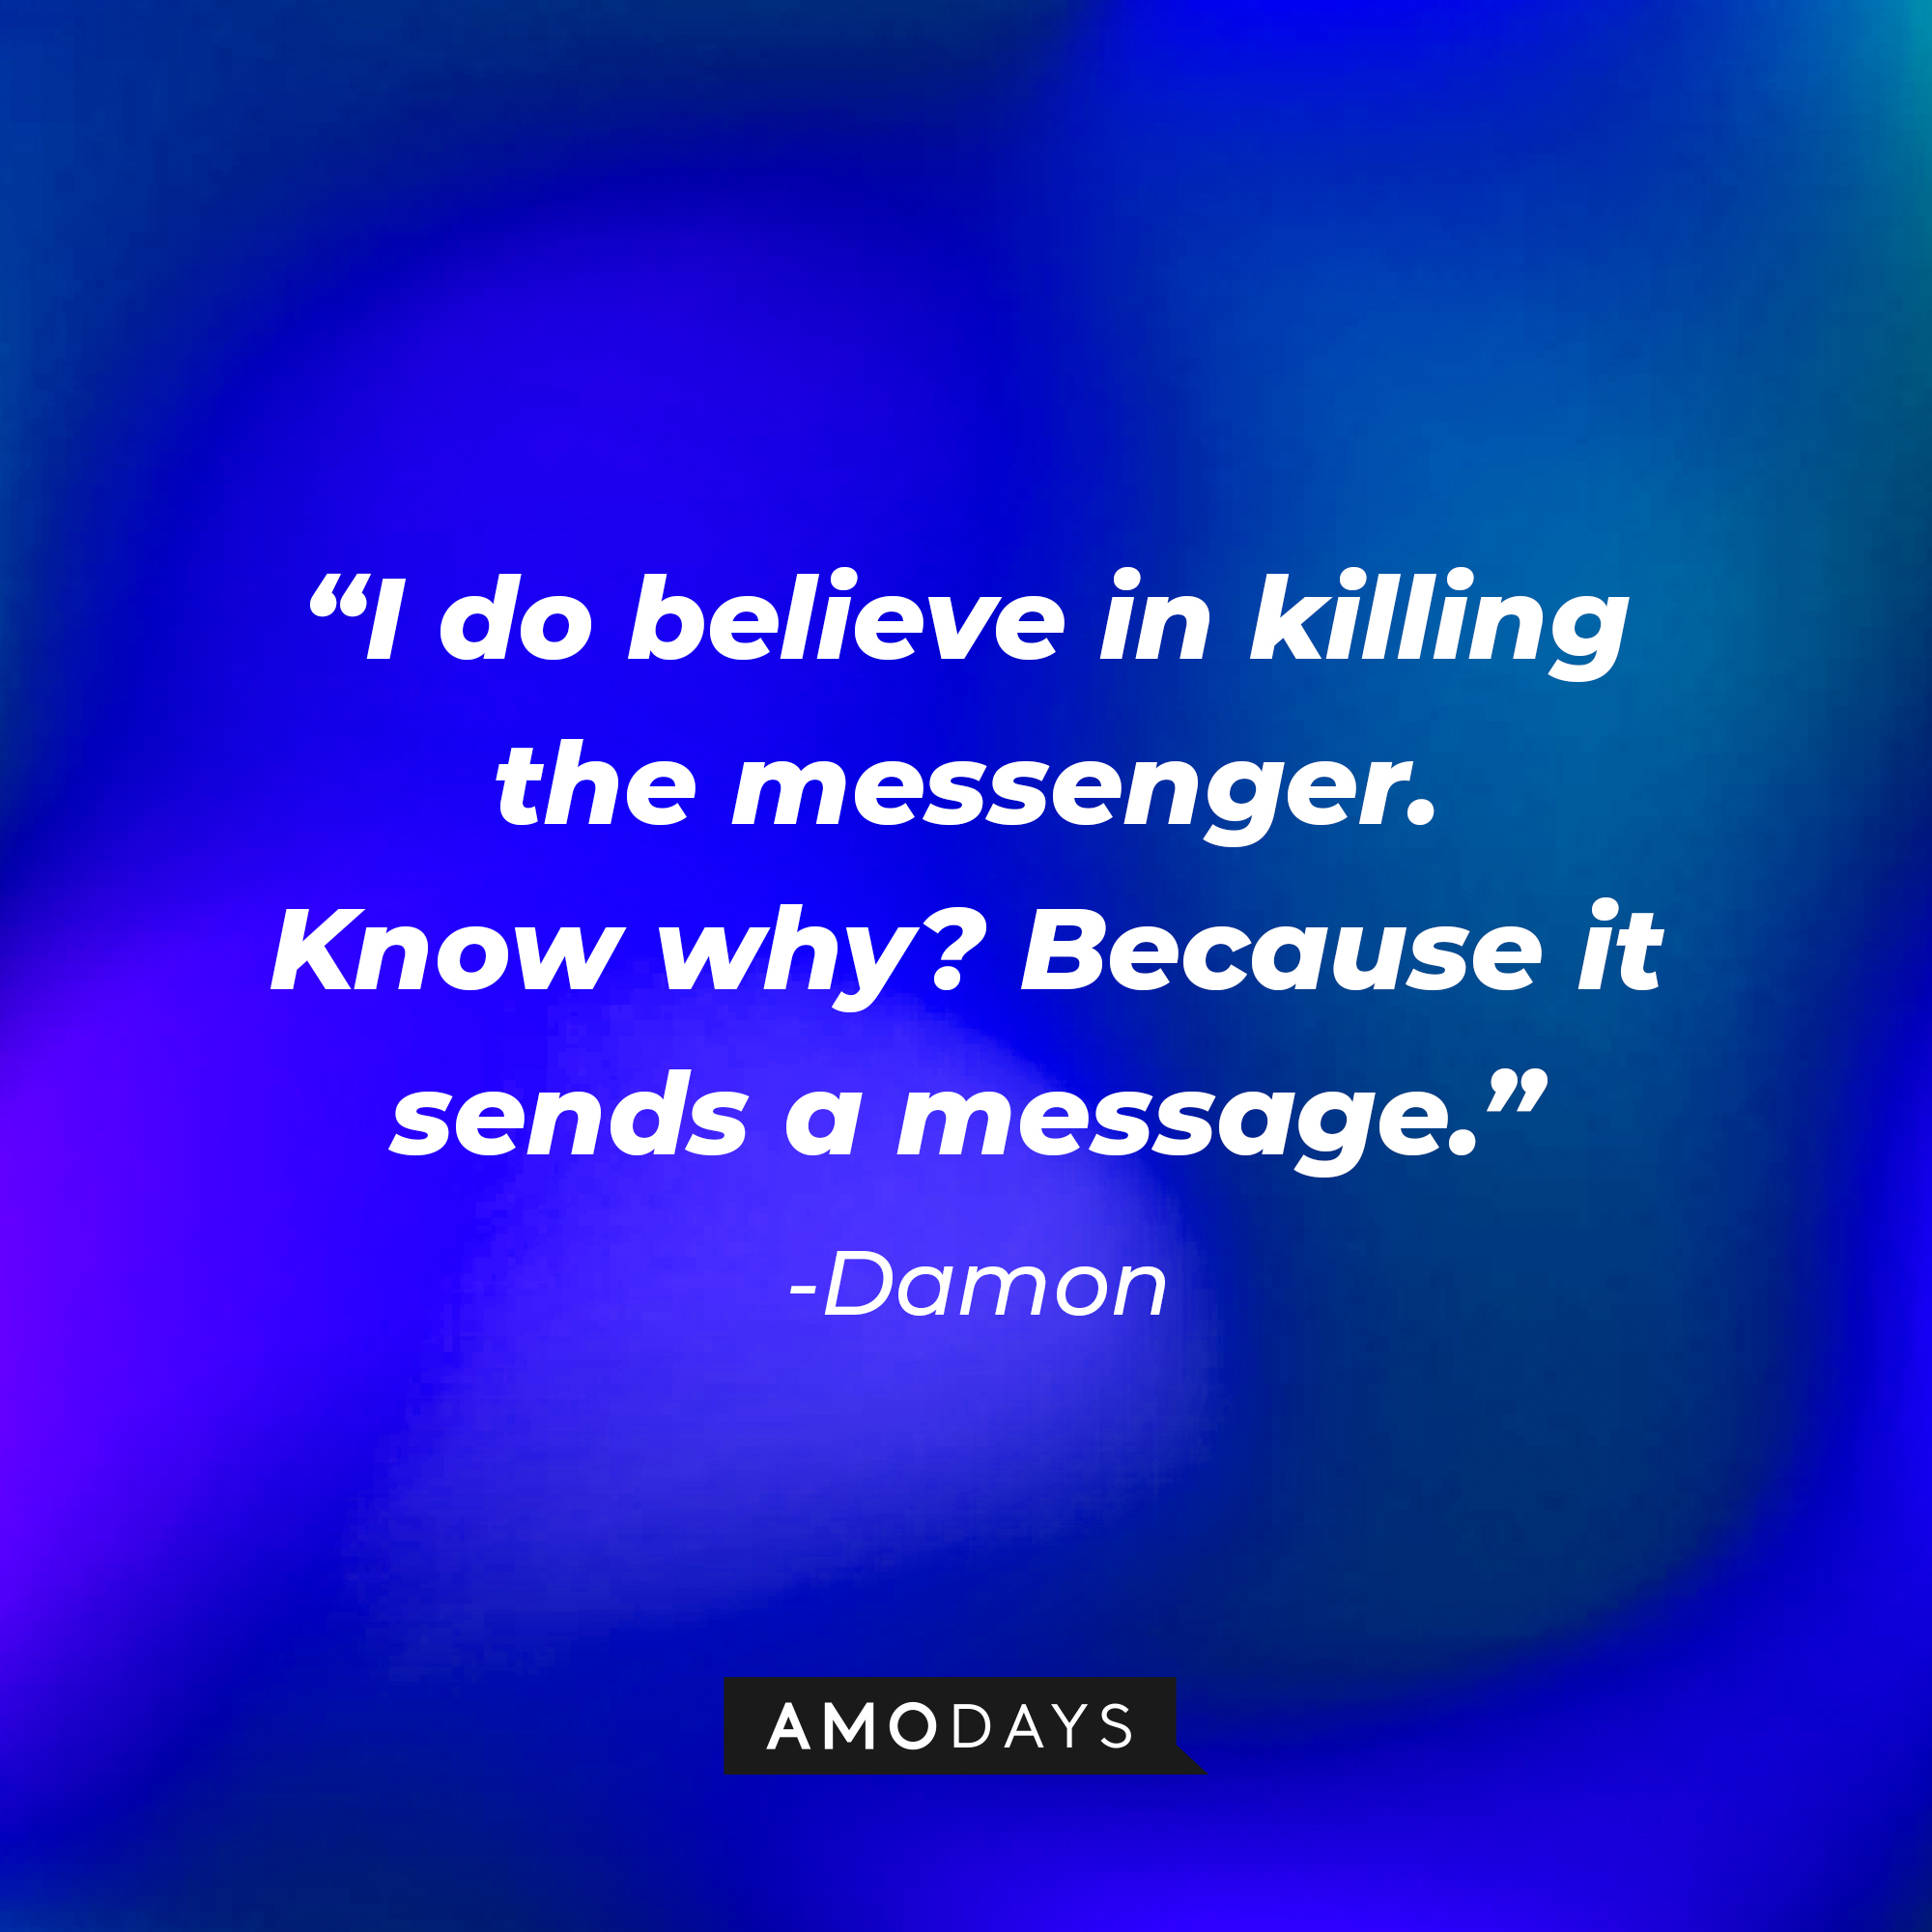 Damon's quote: "I do believe in killing the messenger. Know why? Because it sends a message." | Source: Amodays